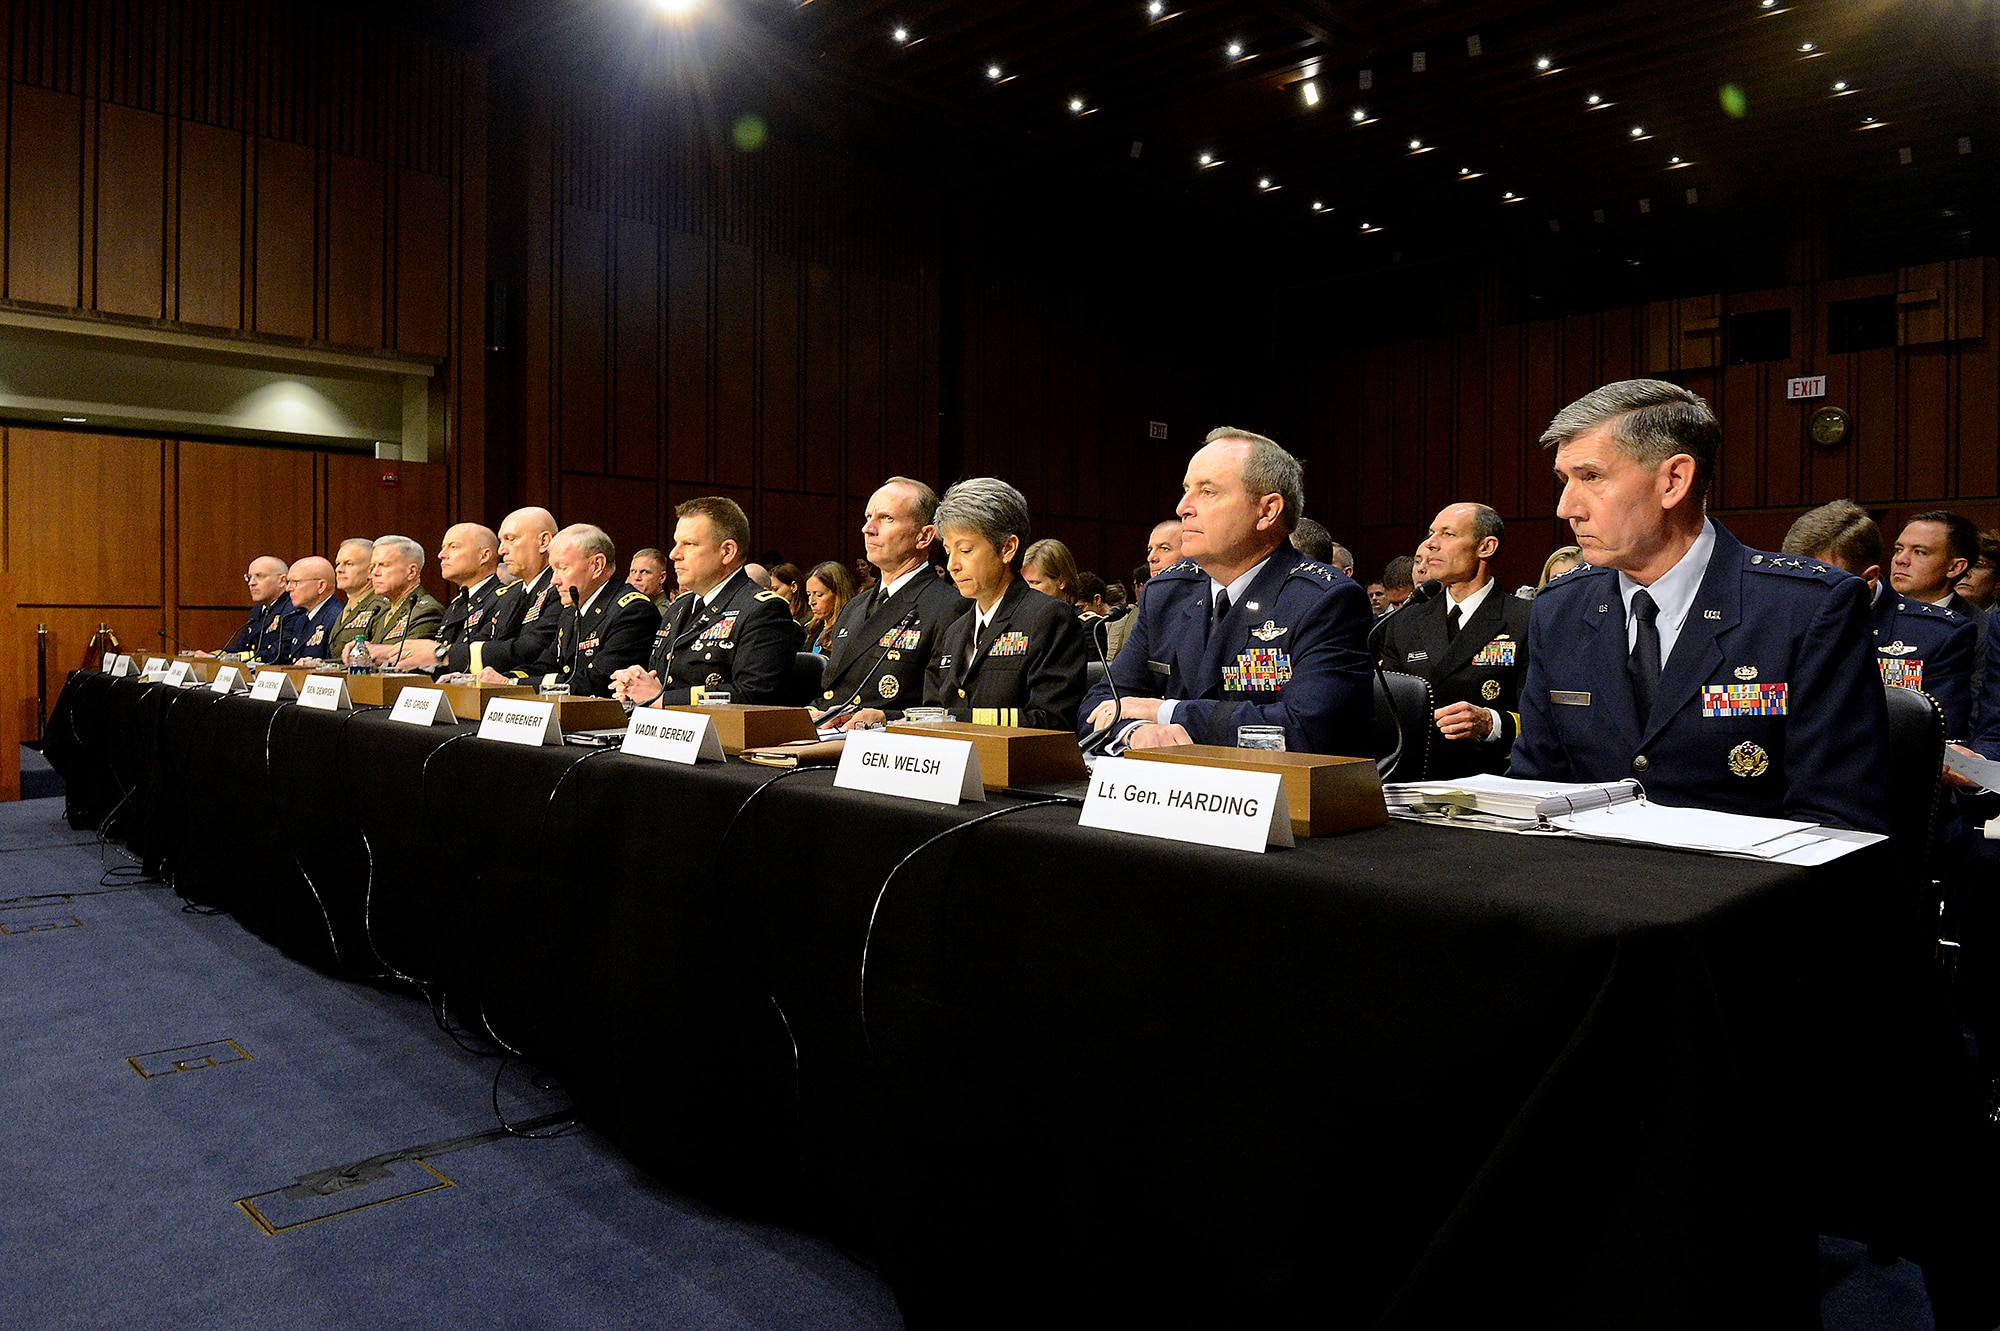 Air Force Chief of Staff Gen. Mark A. Welsh III and the Judge Advocate General Lt. Gen. Richard Harding appear before the Senate Armed Services Committee, June 4, 2013 in Washington, D.C.  During the hearing they testified alongside the chairman of the Joint Chiefs of Staff and the service chiefs from the other branches about combating sexual assault in the military.  (U.S. Air Force photo/Scott M. Ash)